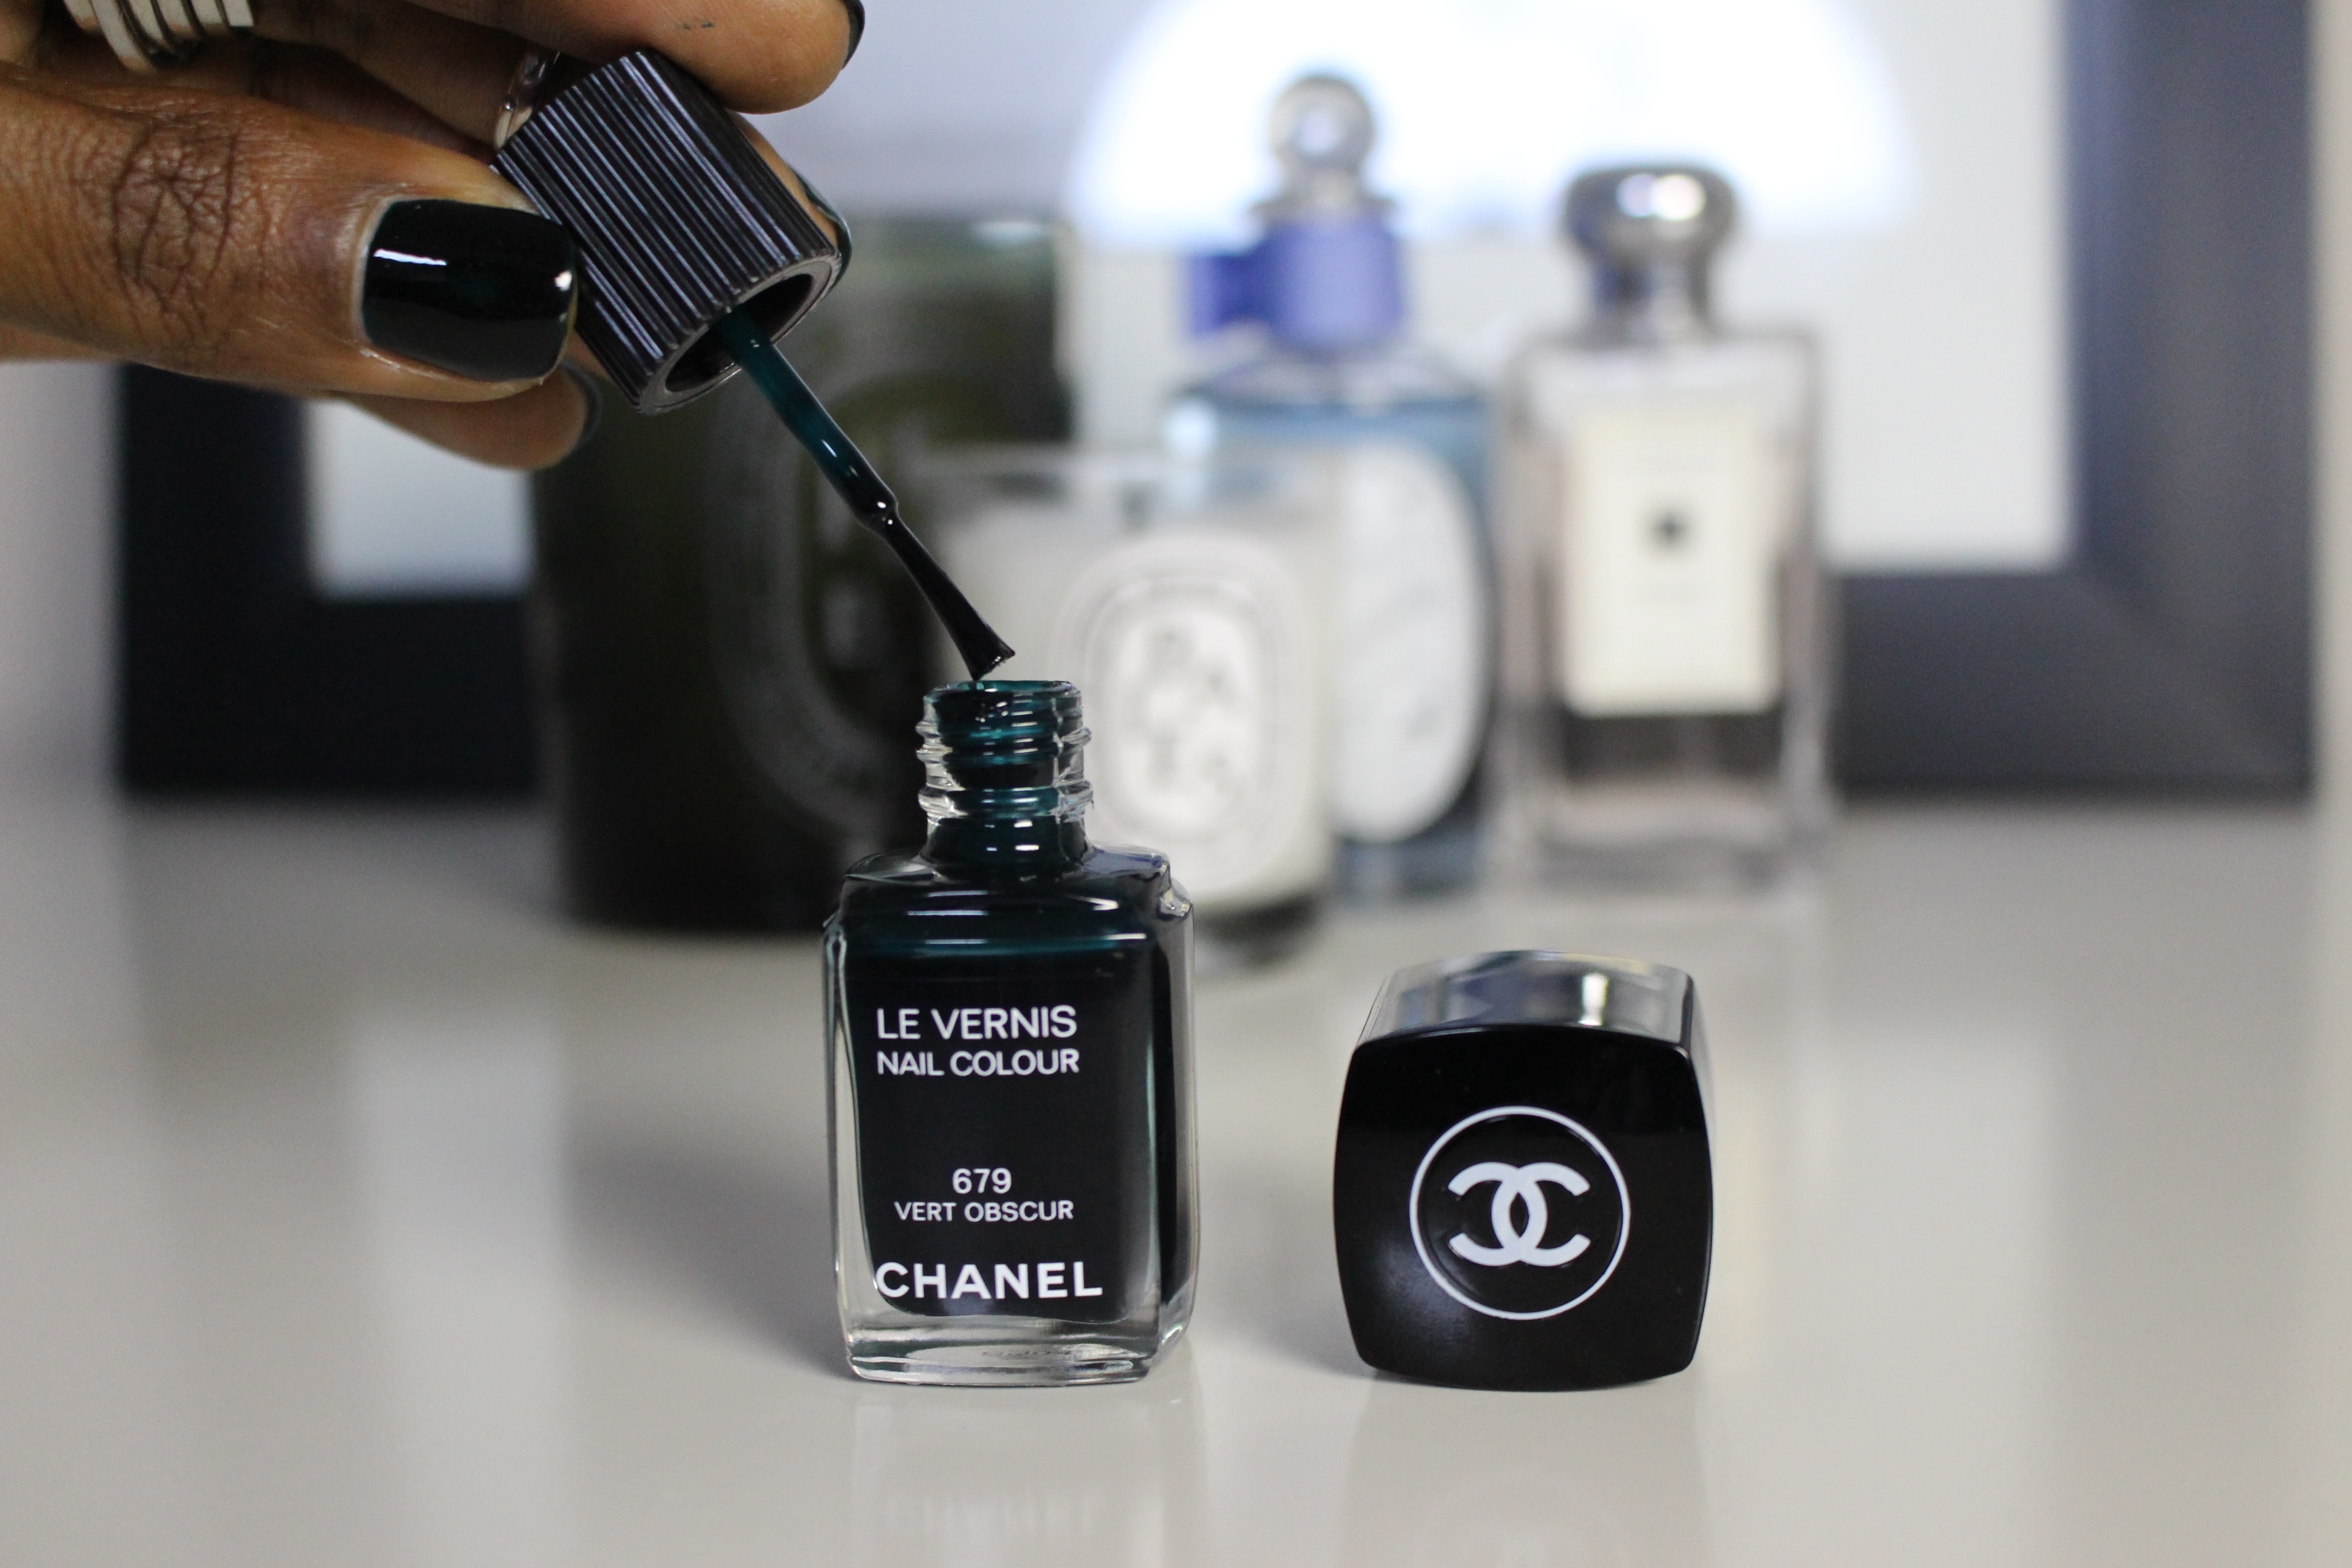 Chanel Le Vernis Vert Obscur Style Domination Fashion Blogger Ottawa